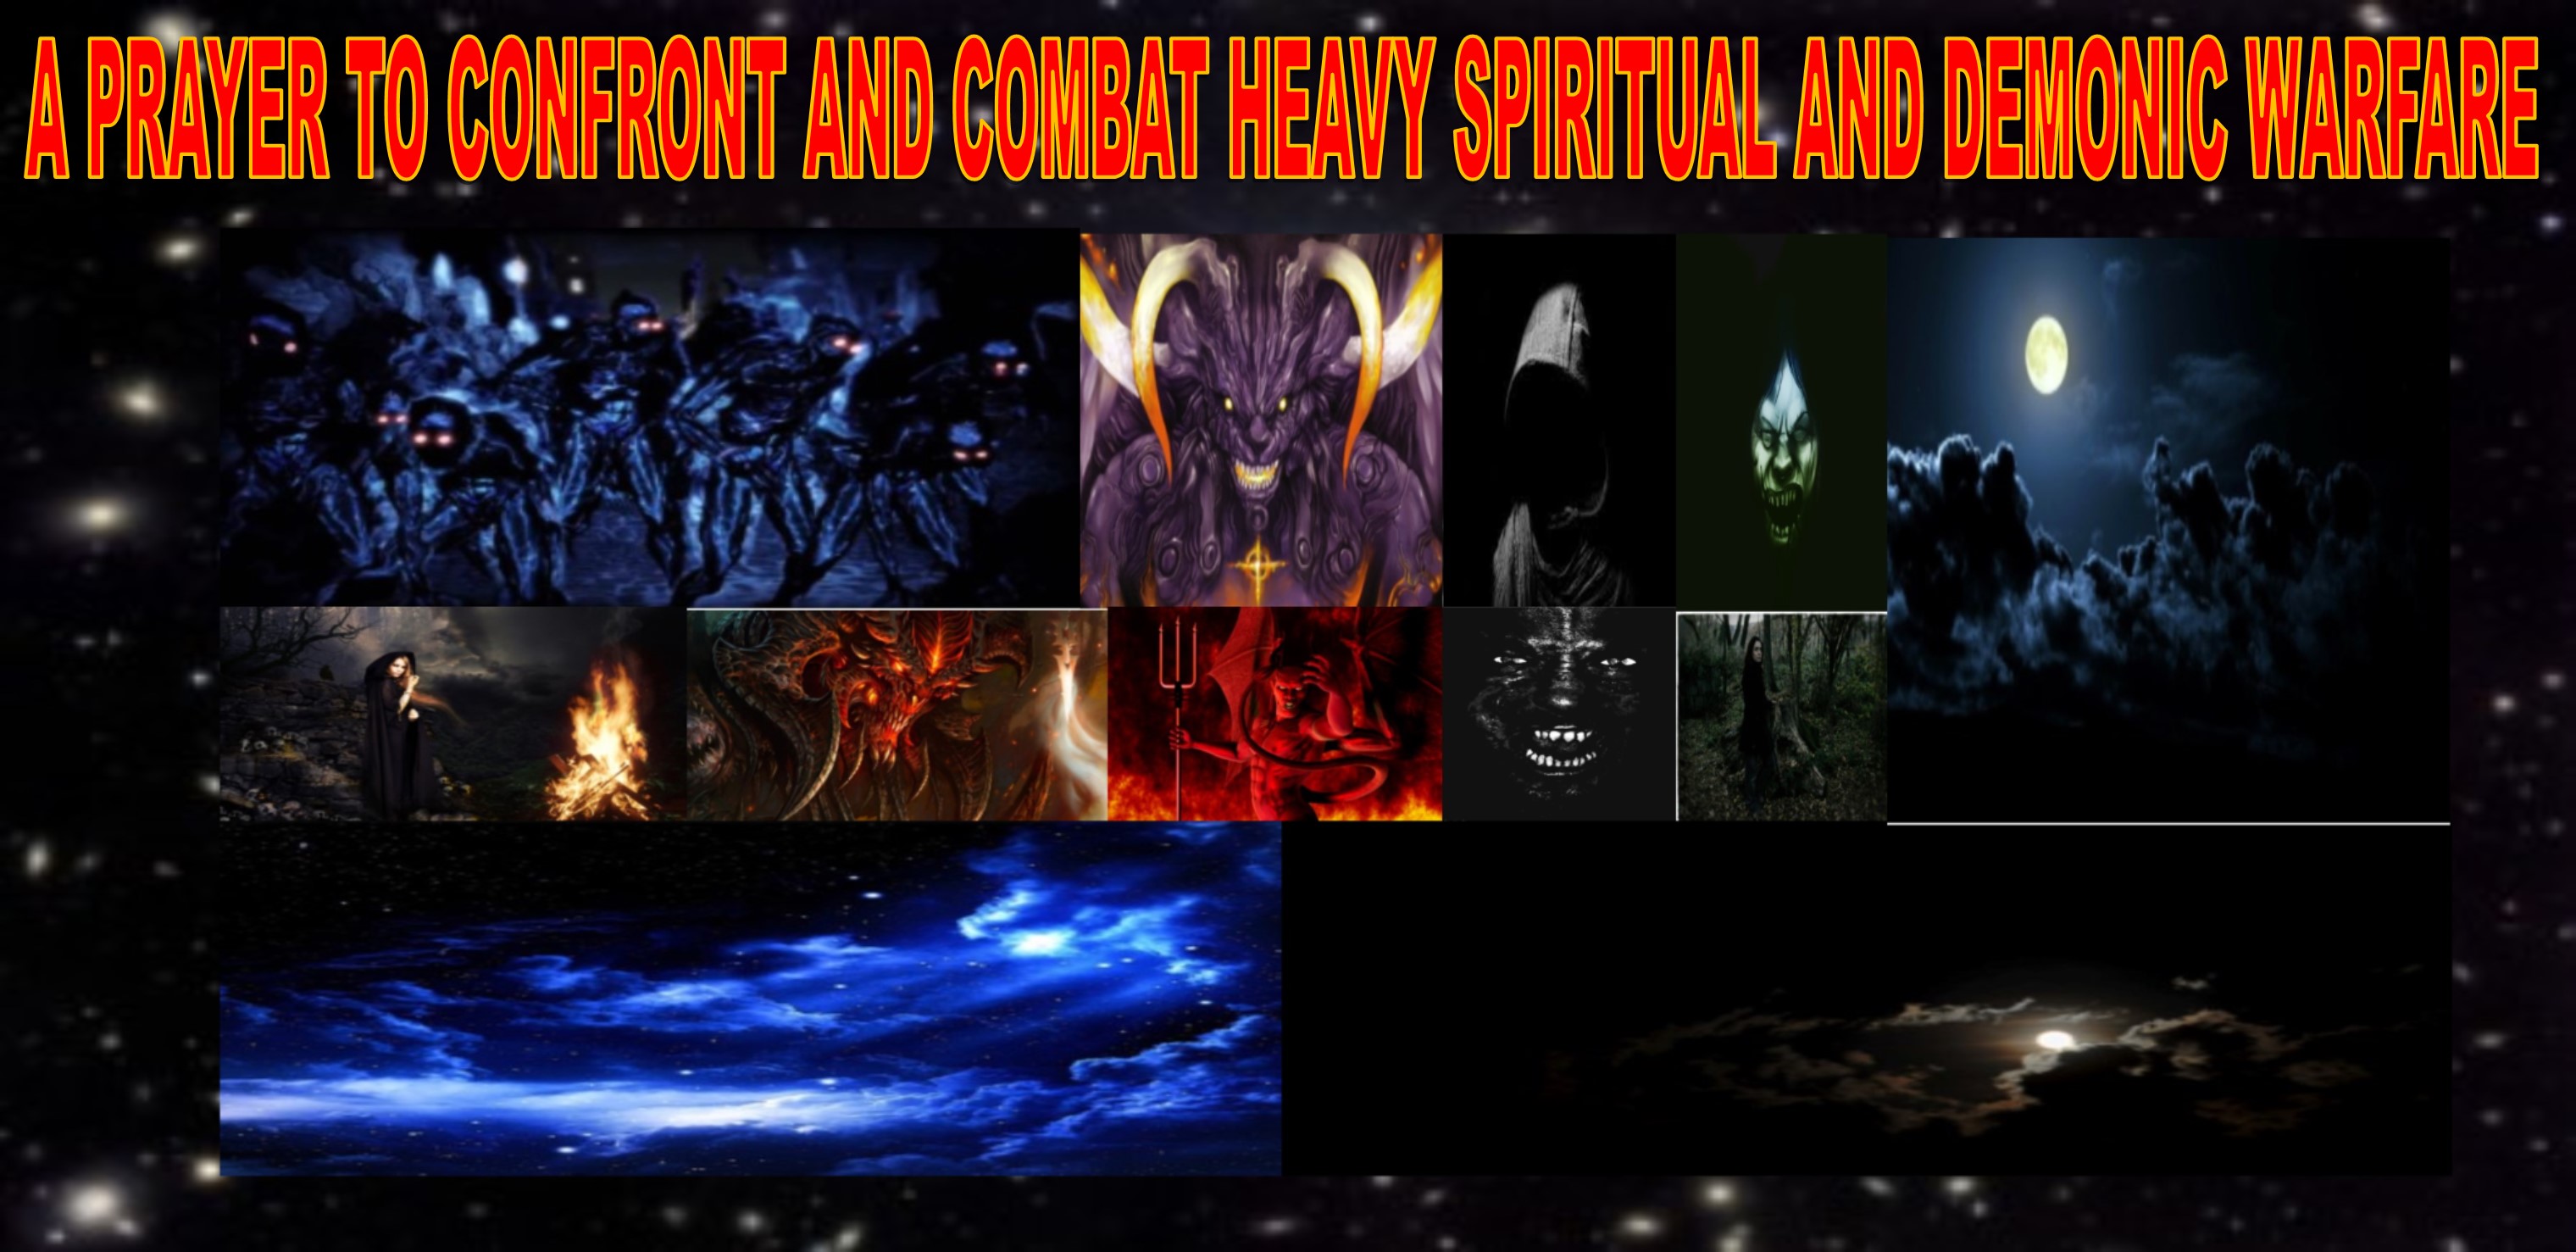 A_PRAYER_TO_CONFRONT_AND_COMBAT_HEAVY_SPIRITUAL_AND_DEMONIC_WARFARE